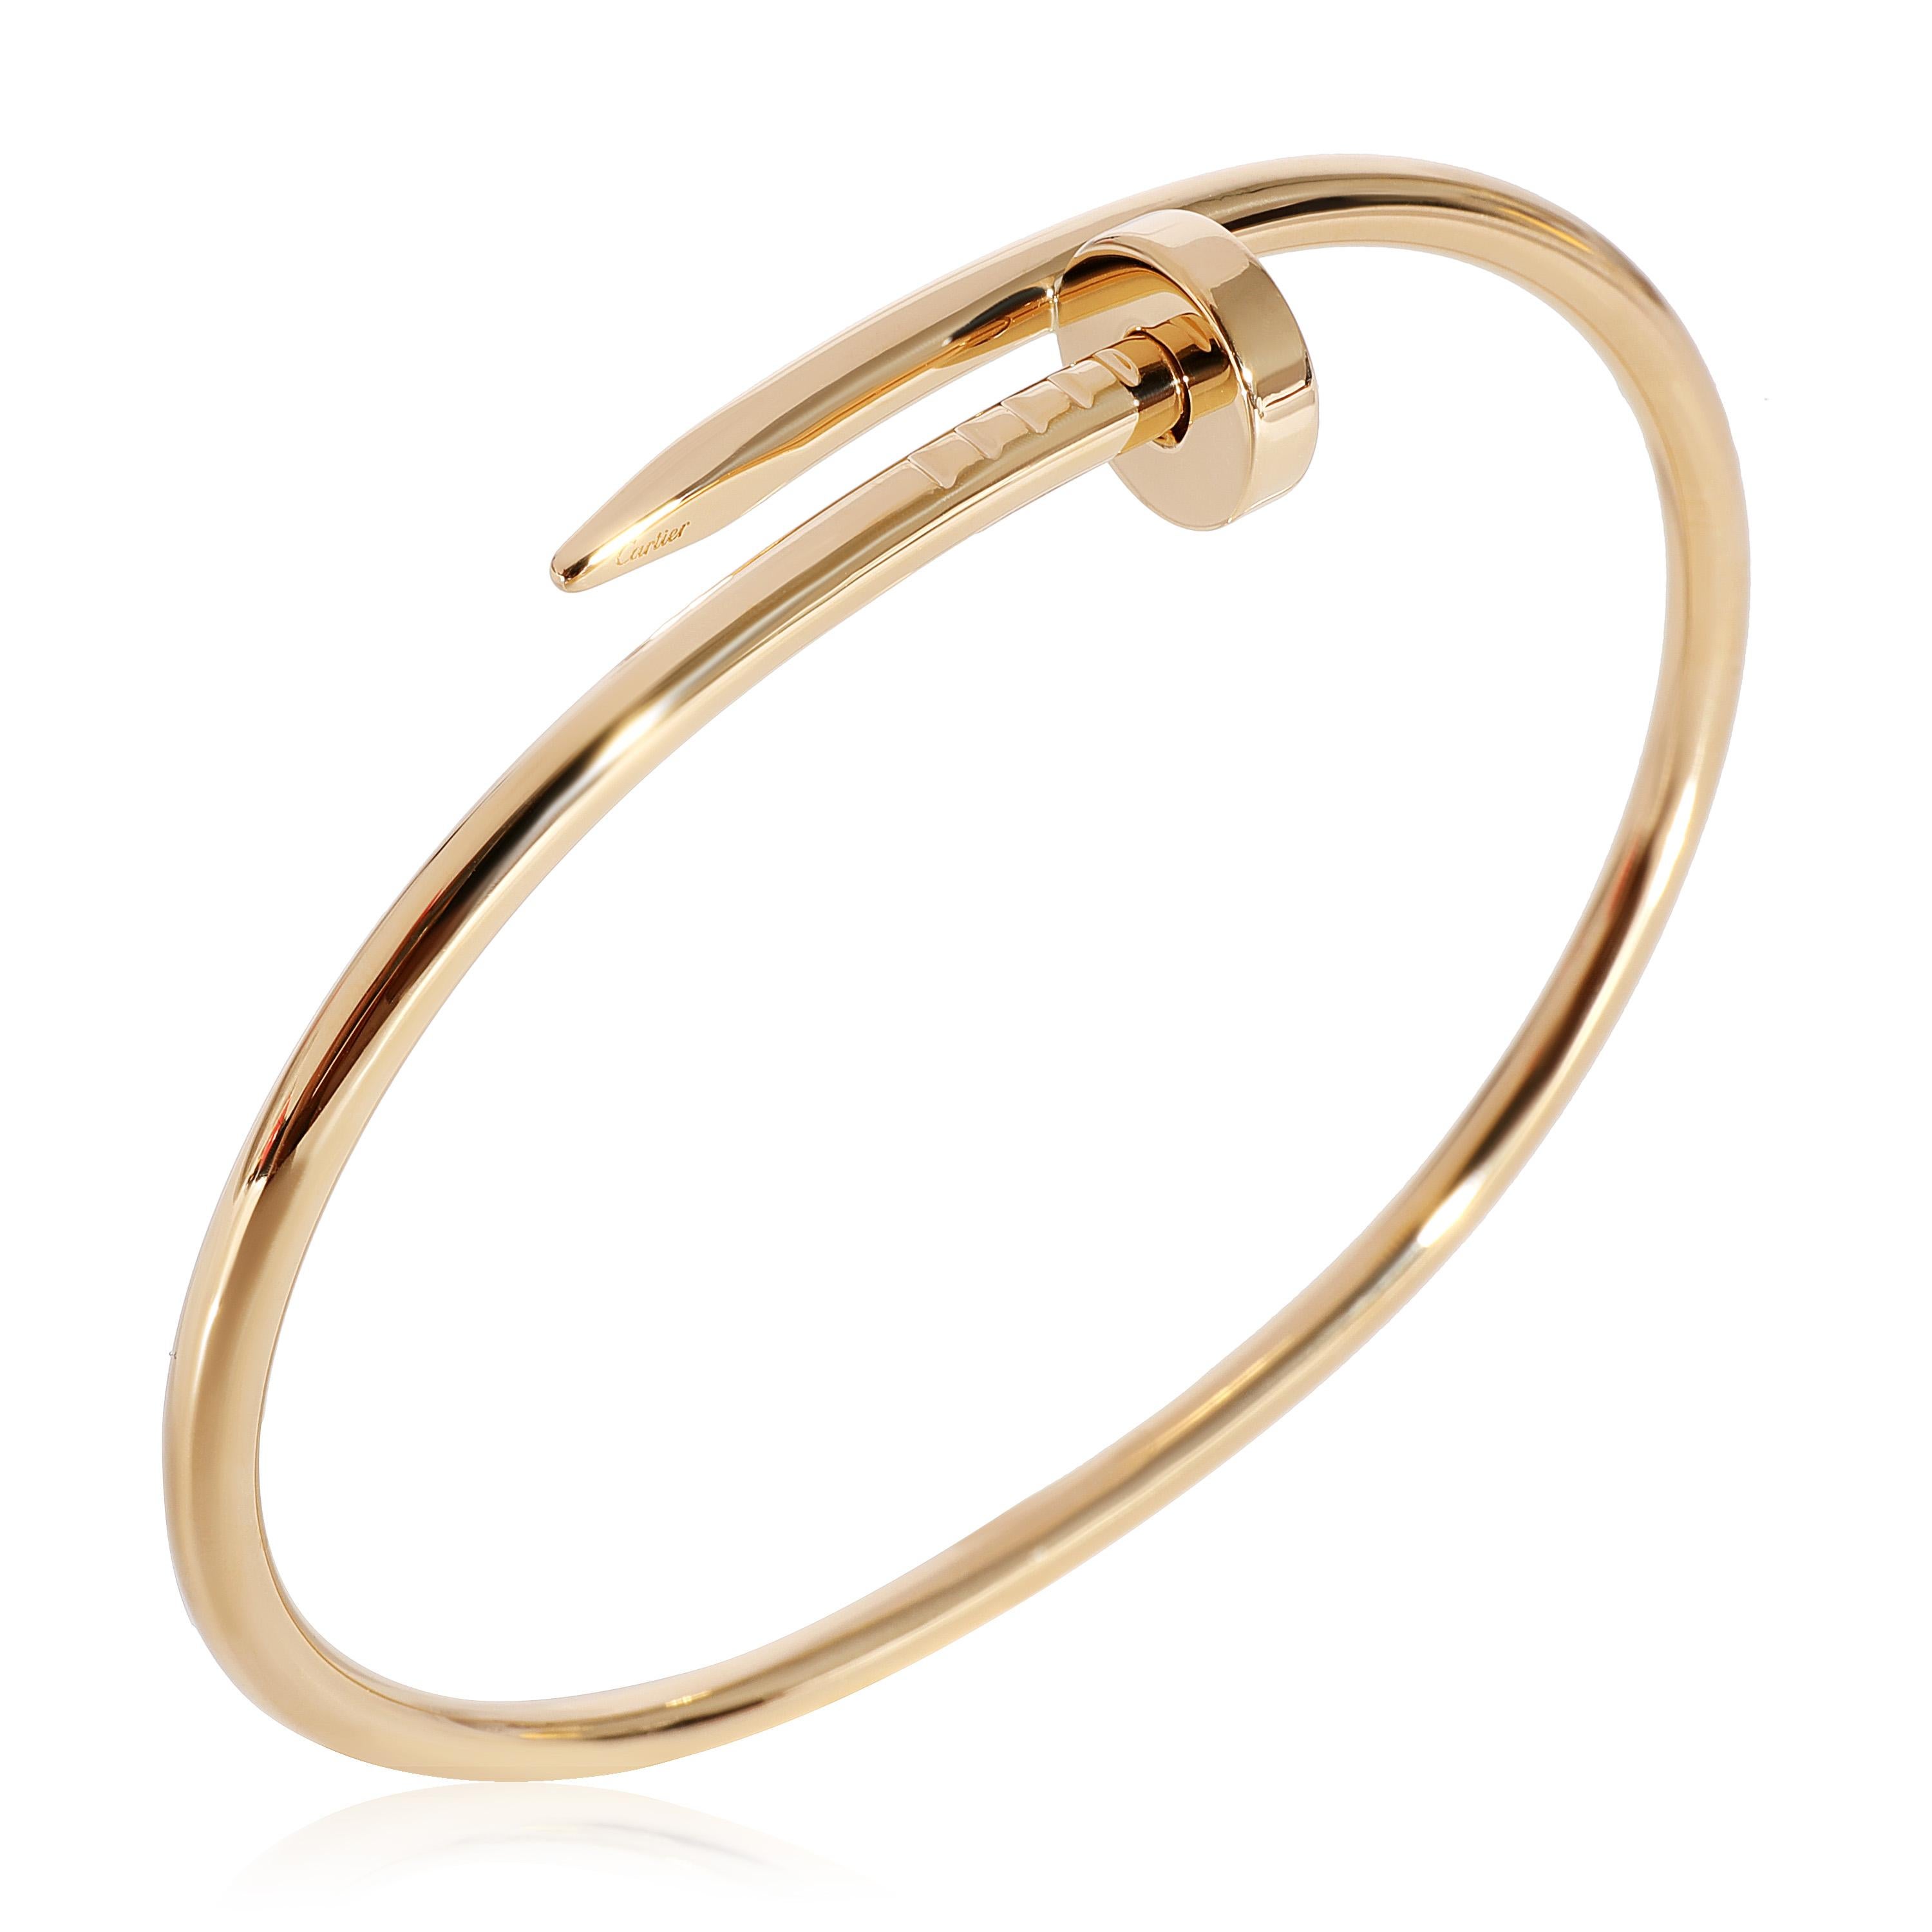 Cartier Juste Un Clou Bracelet in 18k Yellow Gold

PRIMARY DETAILS
SKU: 123595
Listing Title: Cartier Juste Un Clou Bracelet in 18k Yellow Gold
Condition Description: Retails for 7500 USD. In excellent condition and recently polished. 20 inches in